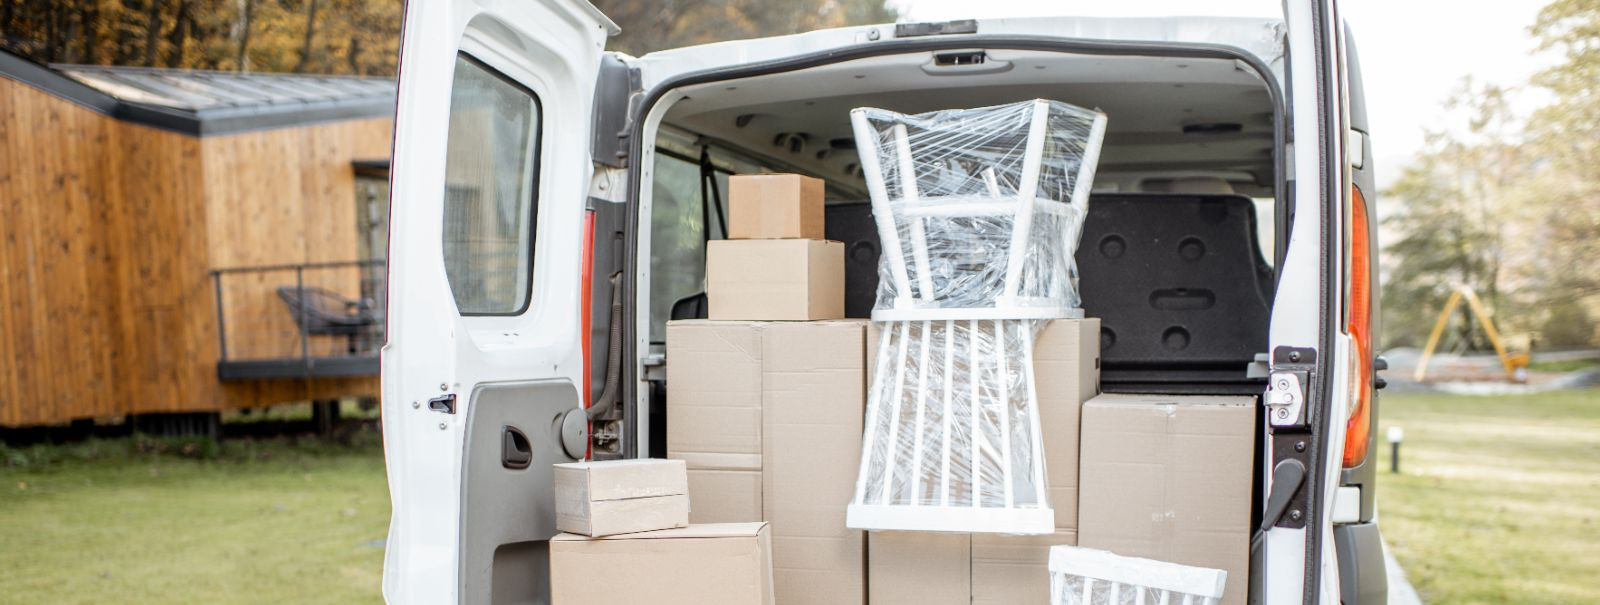 Moving furniture can be a daunting task, whether you're relocating your home or office. Ensuring the safety of your belongings during a move is paramount, and w